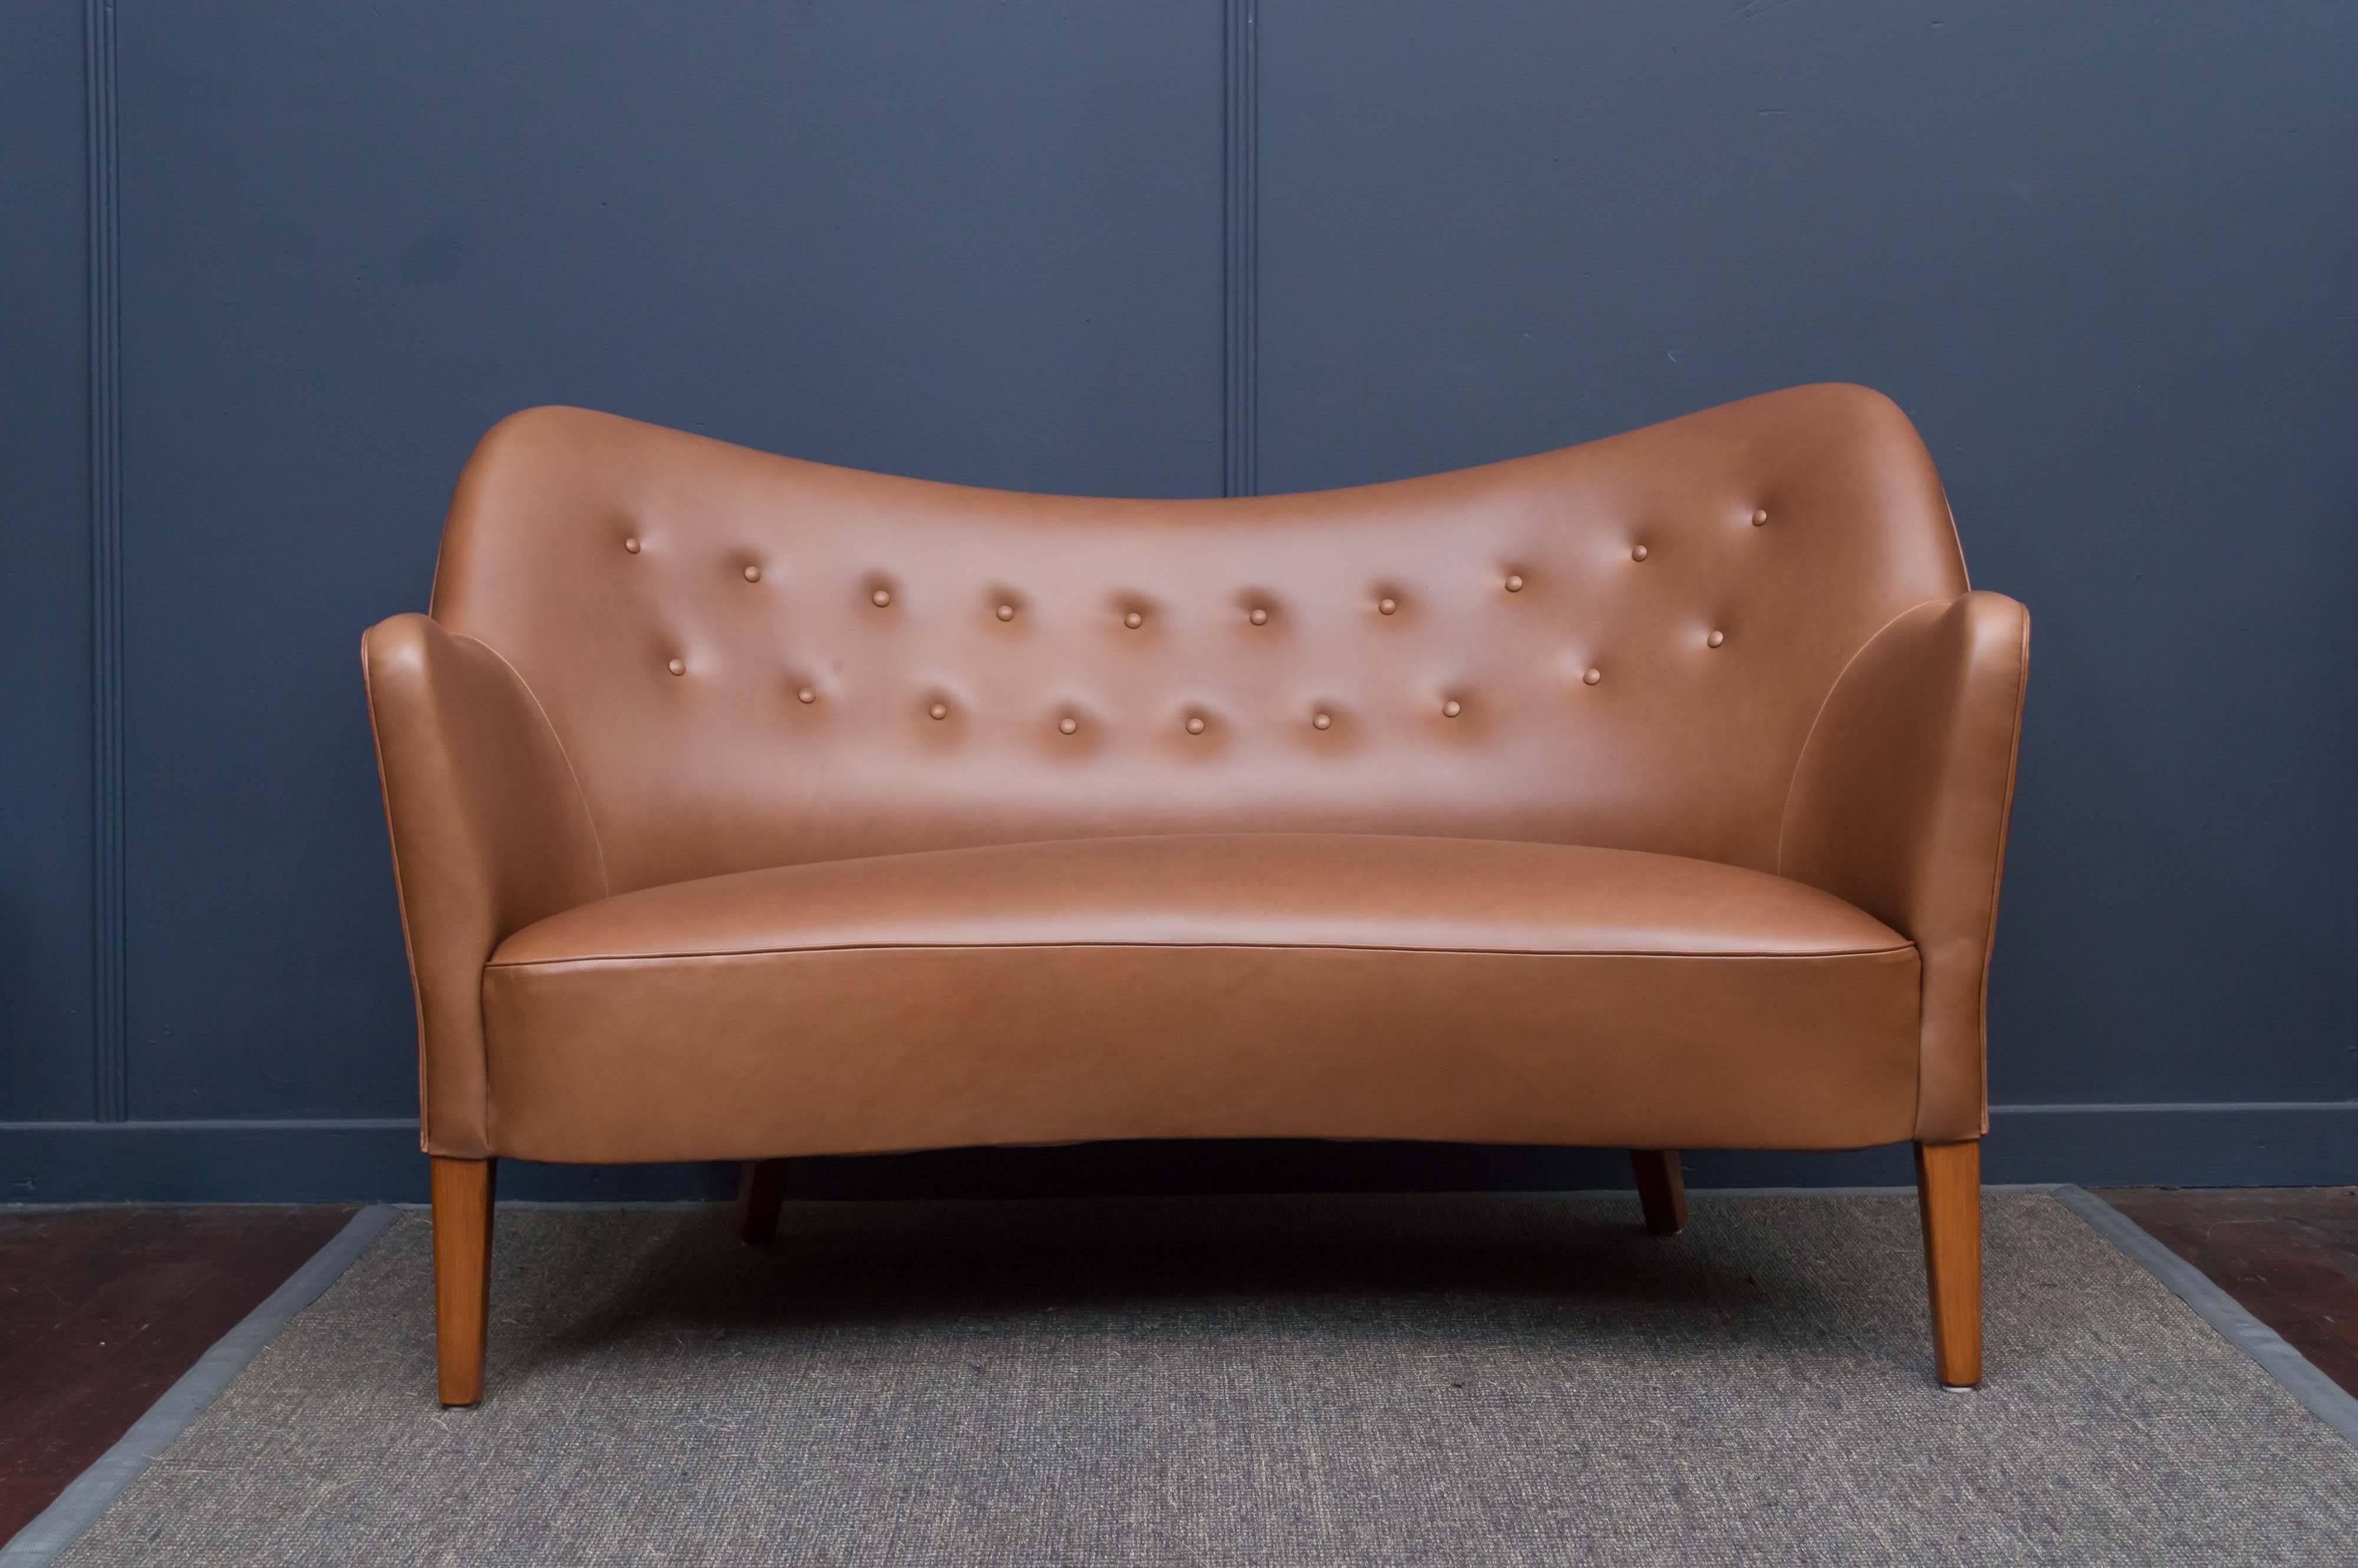 Fluid and inviting petite sofa made by Slagelse Mobelvaerk, Denmark.
High quality solid construction teak frame, newly upholstered in cognac leather.